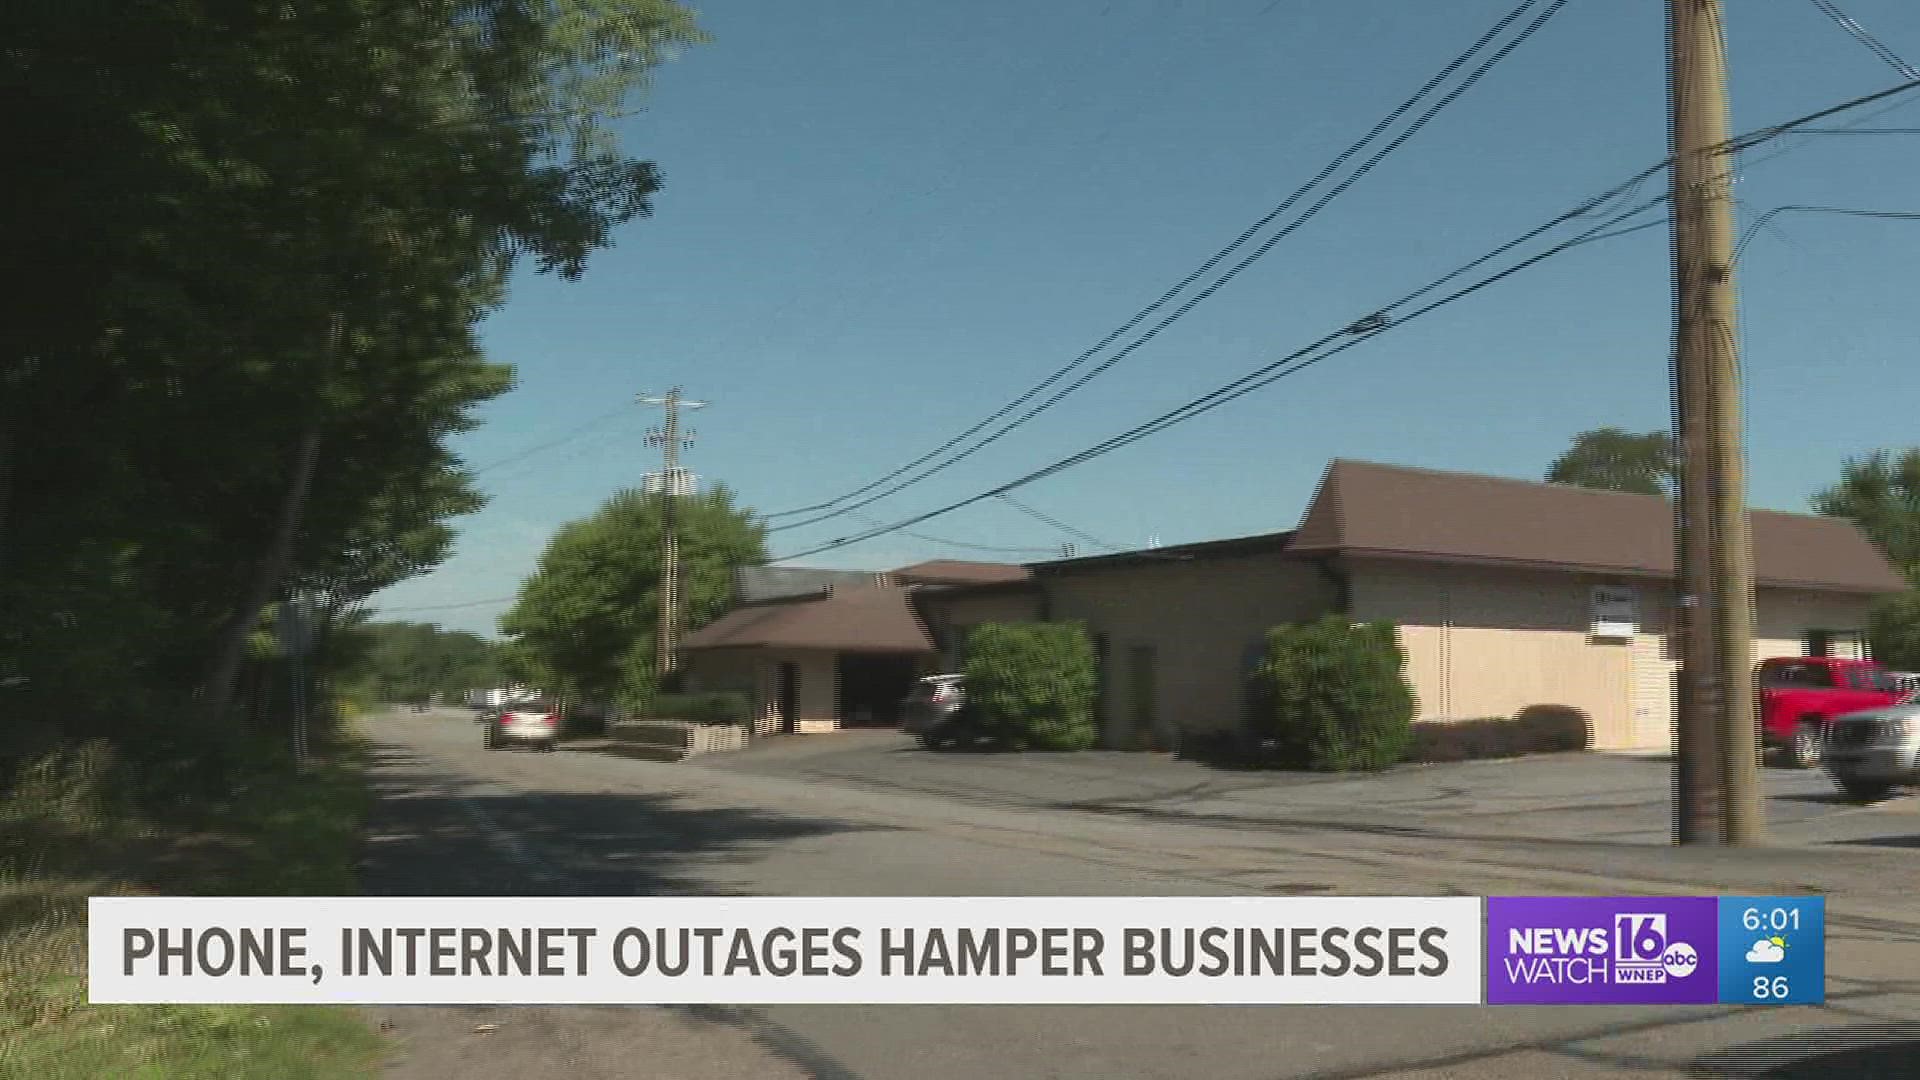 A delay in internet service repairs through Frontier Communications is frustrating local businesses.